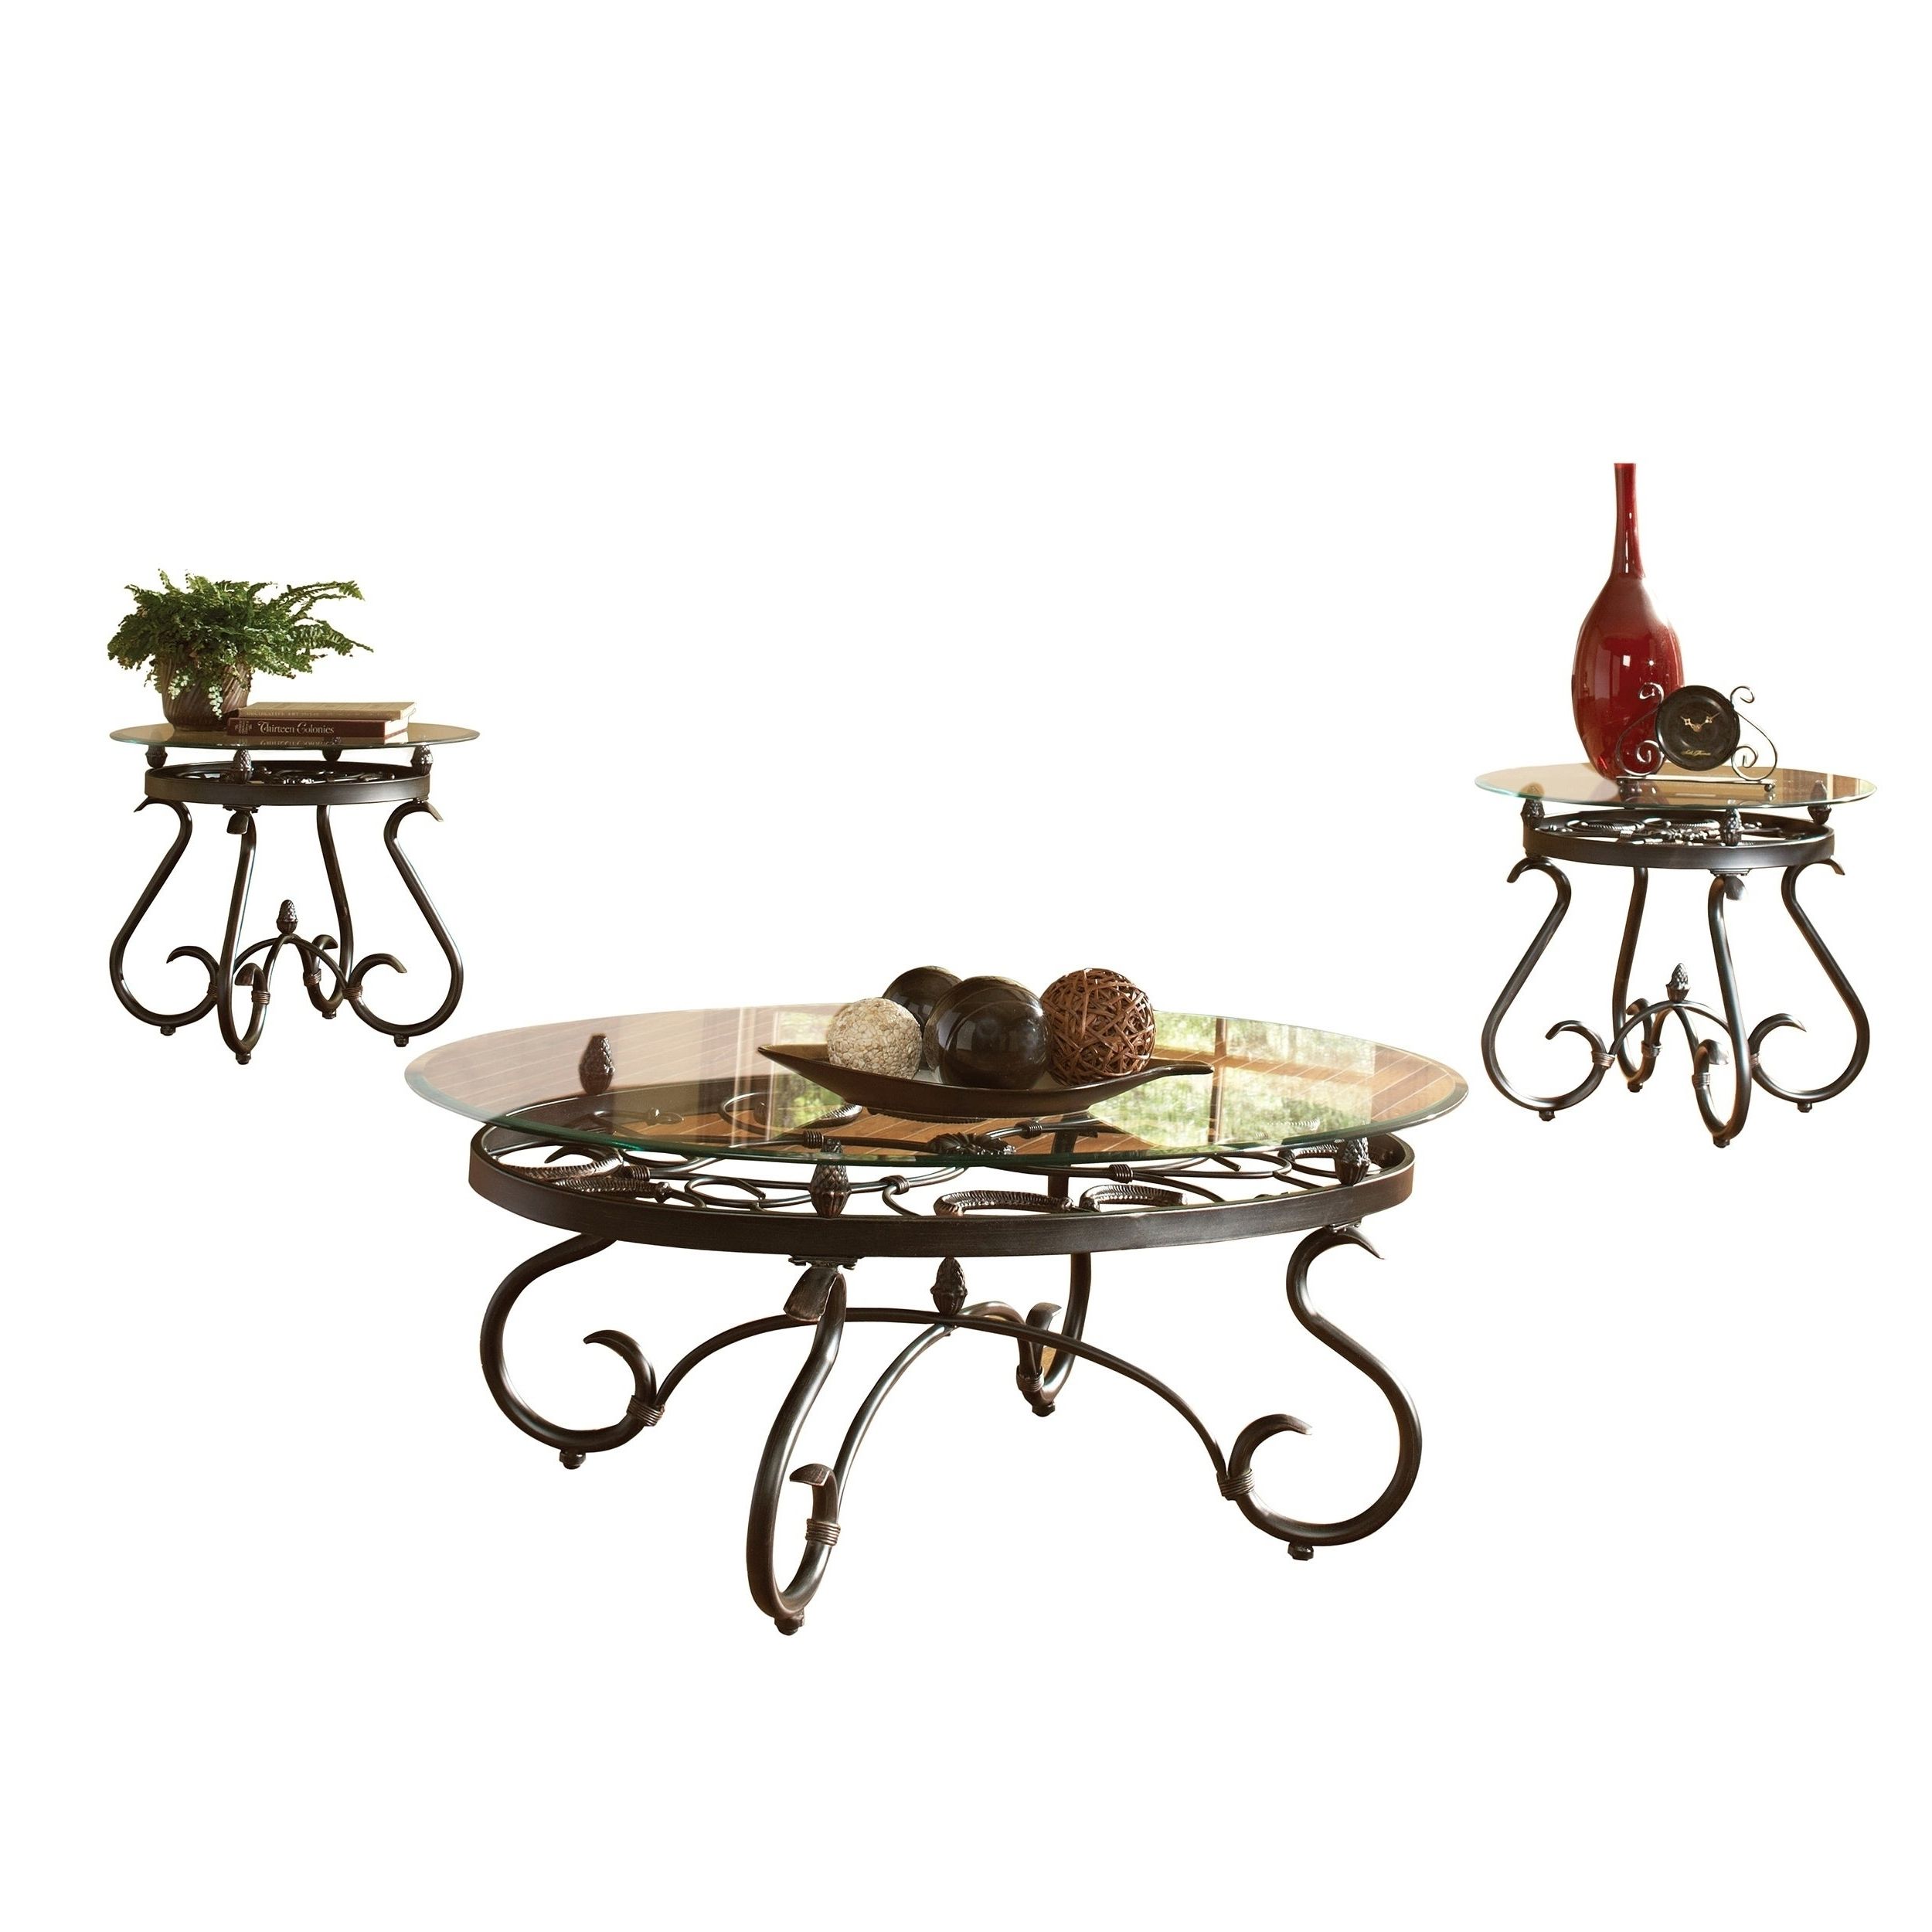 Most Recently Released Gracewood Hollow Fishta Antique Brass Metal Glass 3 Piece Tables With Regard To Gracewood Hollow Fishta Antique Brass Metal/ Glass 3 Piece Table Set (View 2 of 20)